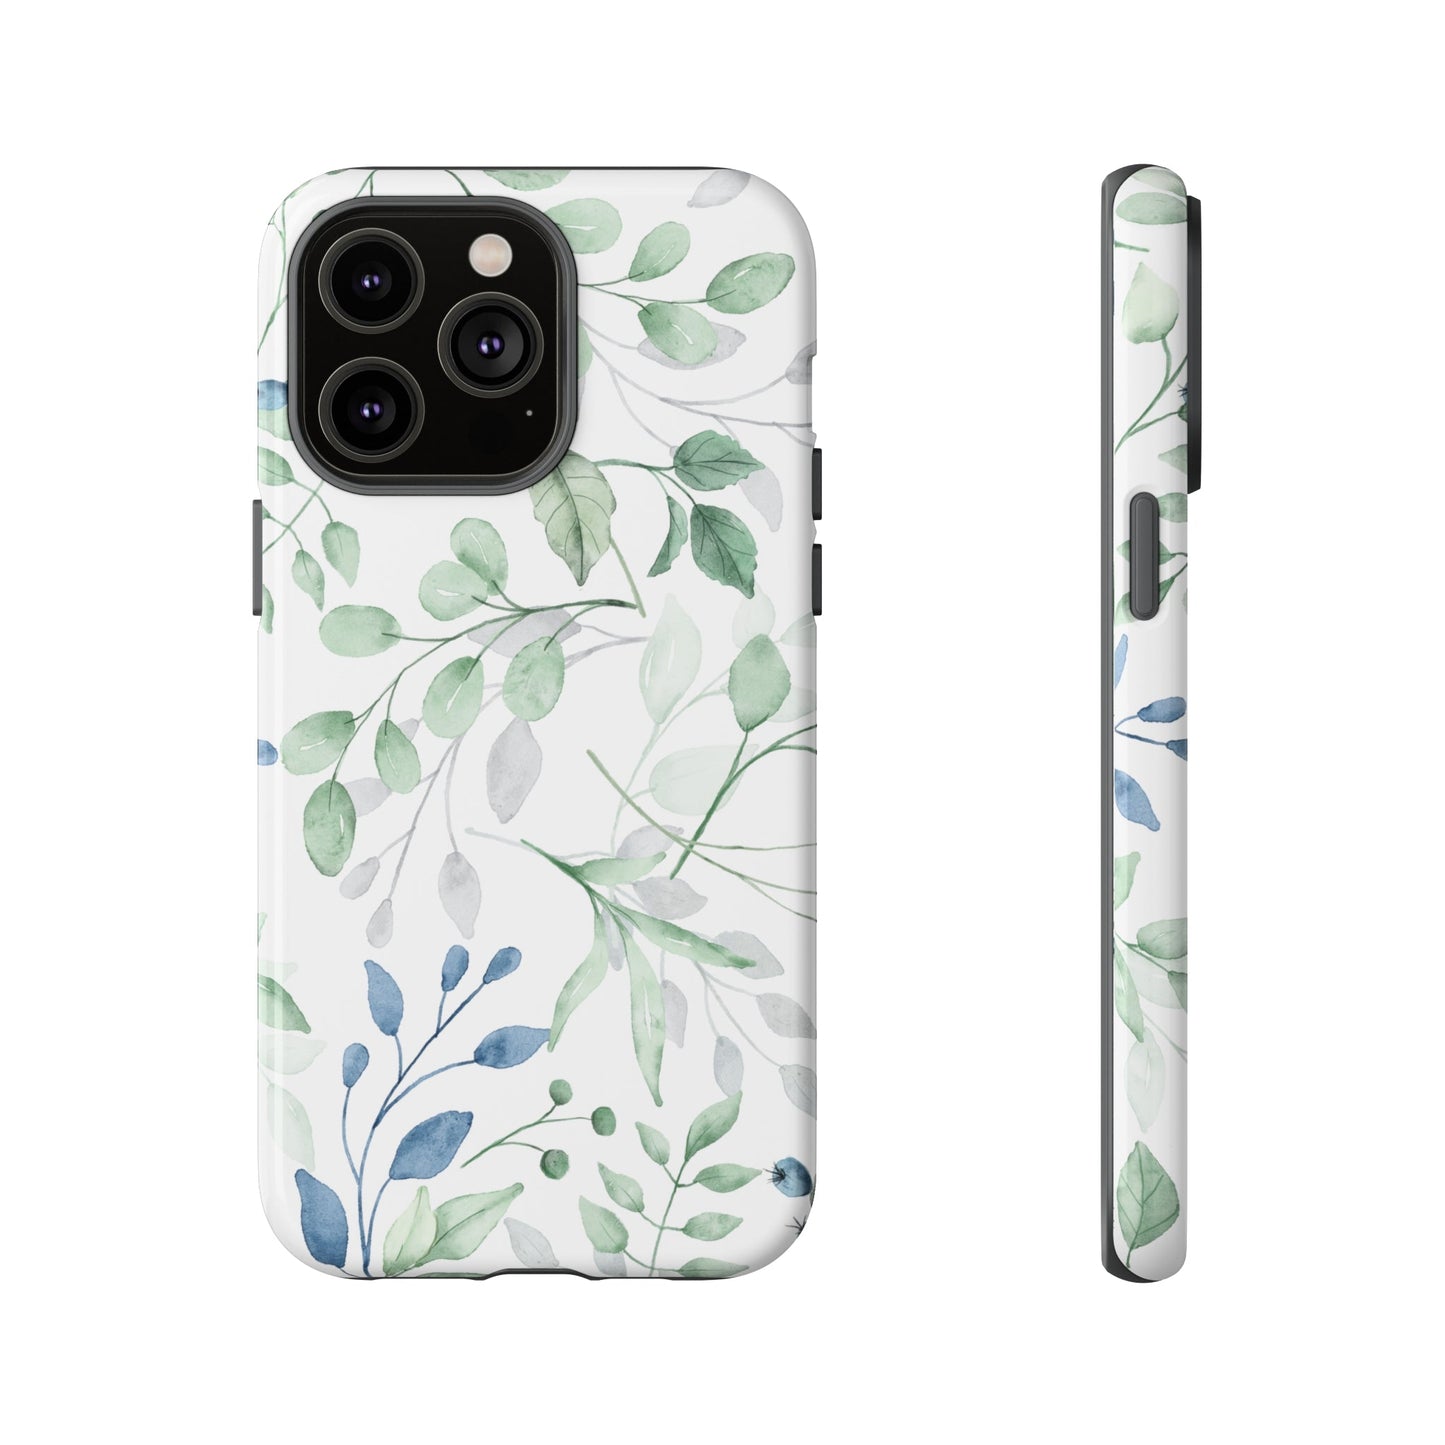 Botanical Phone case fits devices iPhone Samsung Galaxy Google Pixel - Cheerful Lane